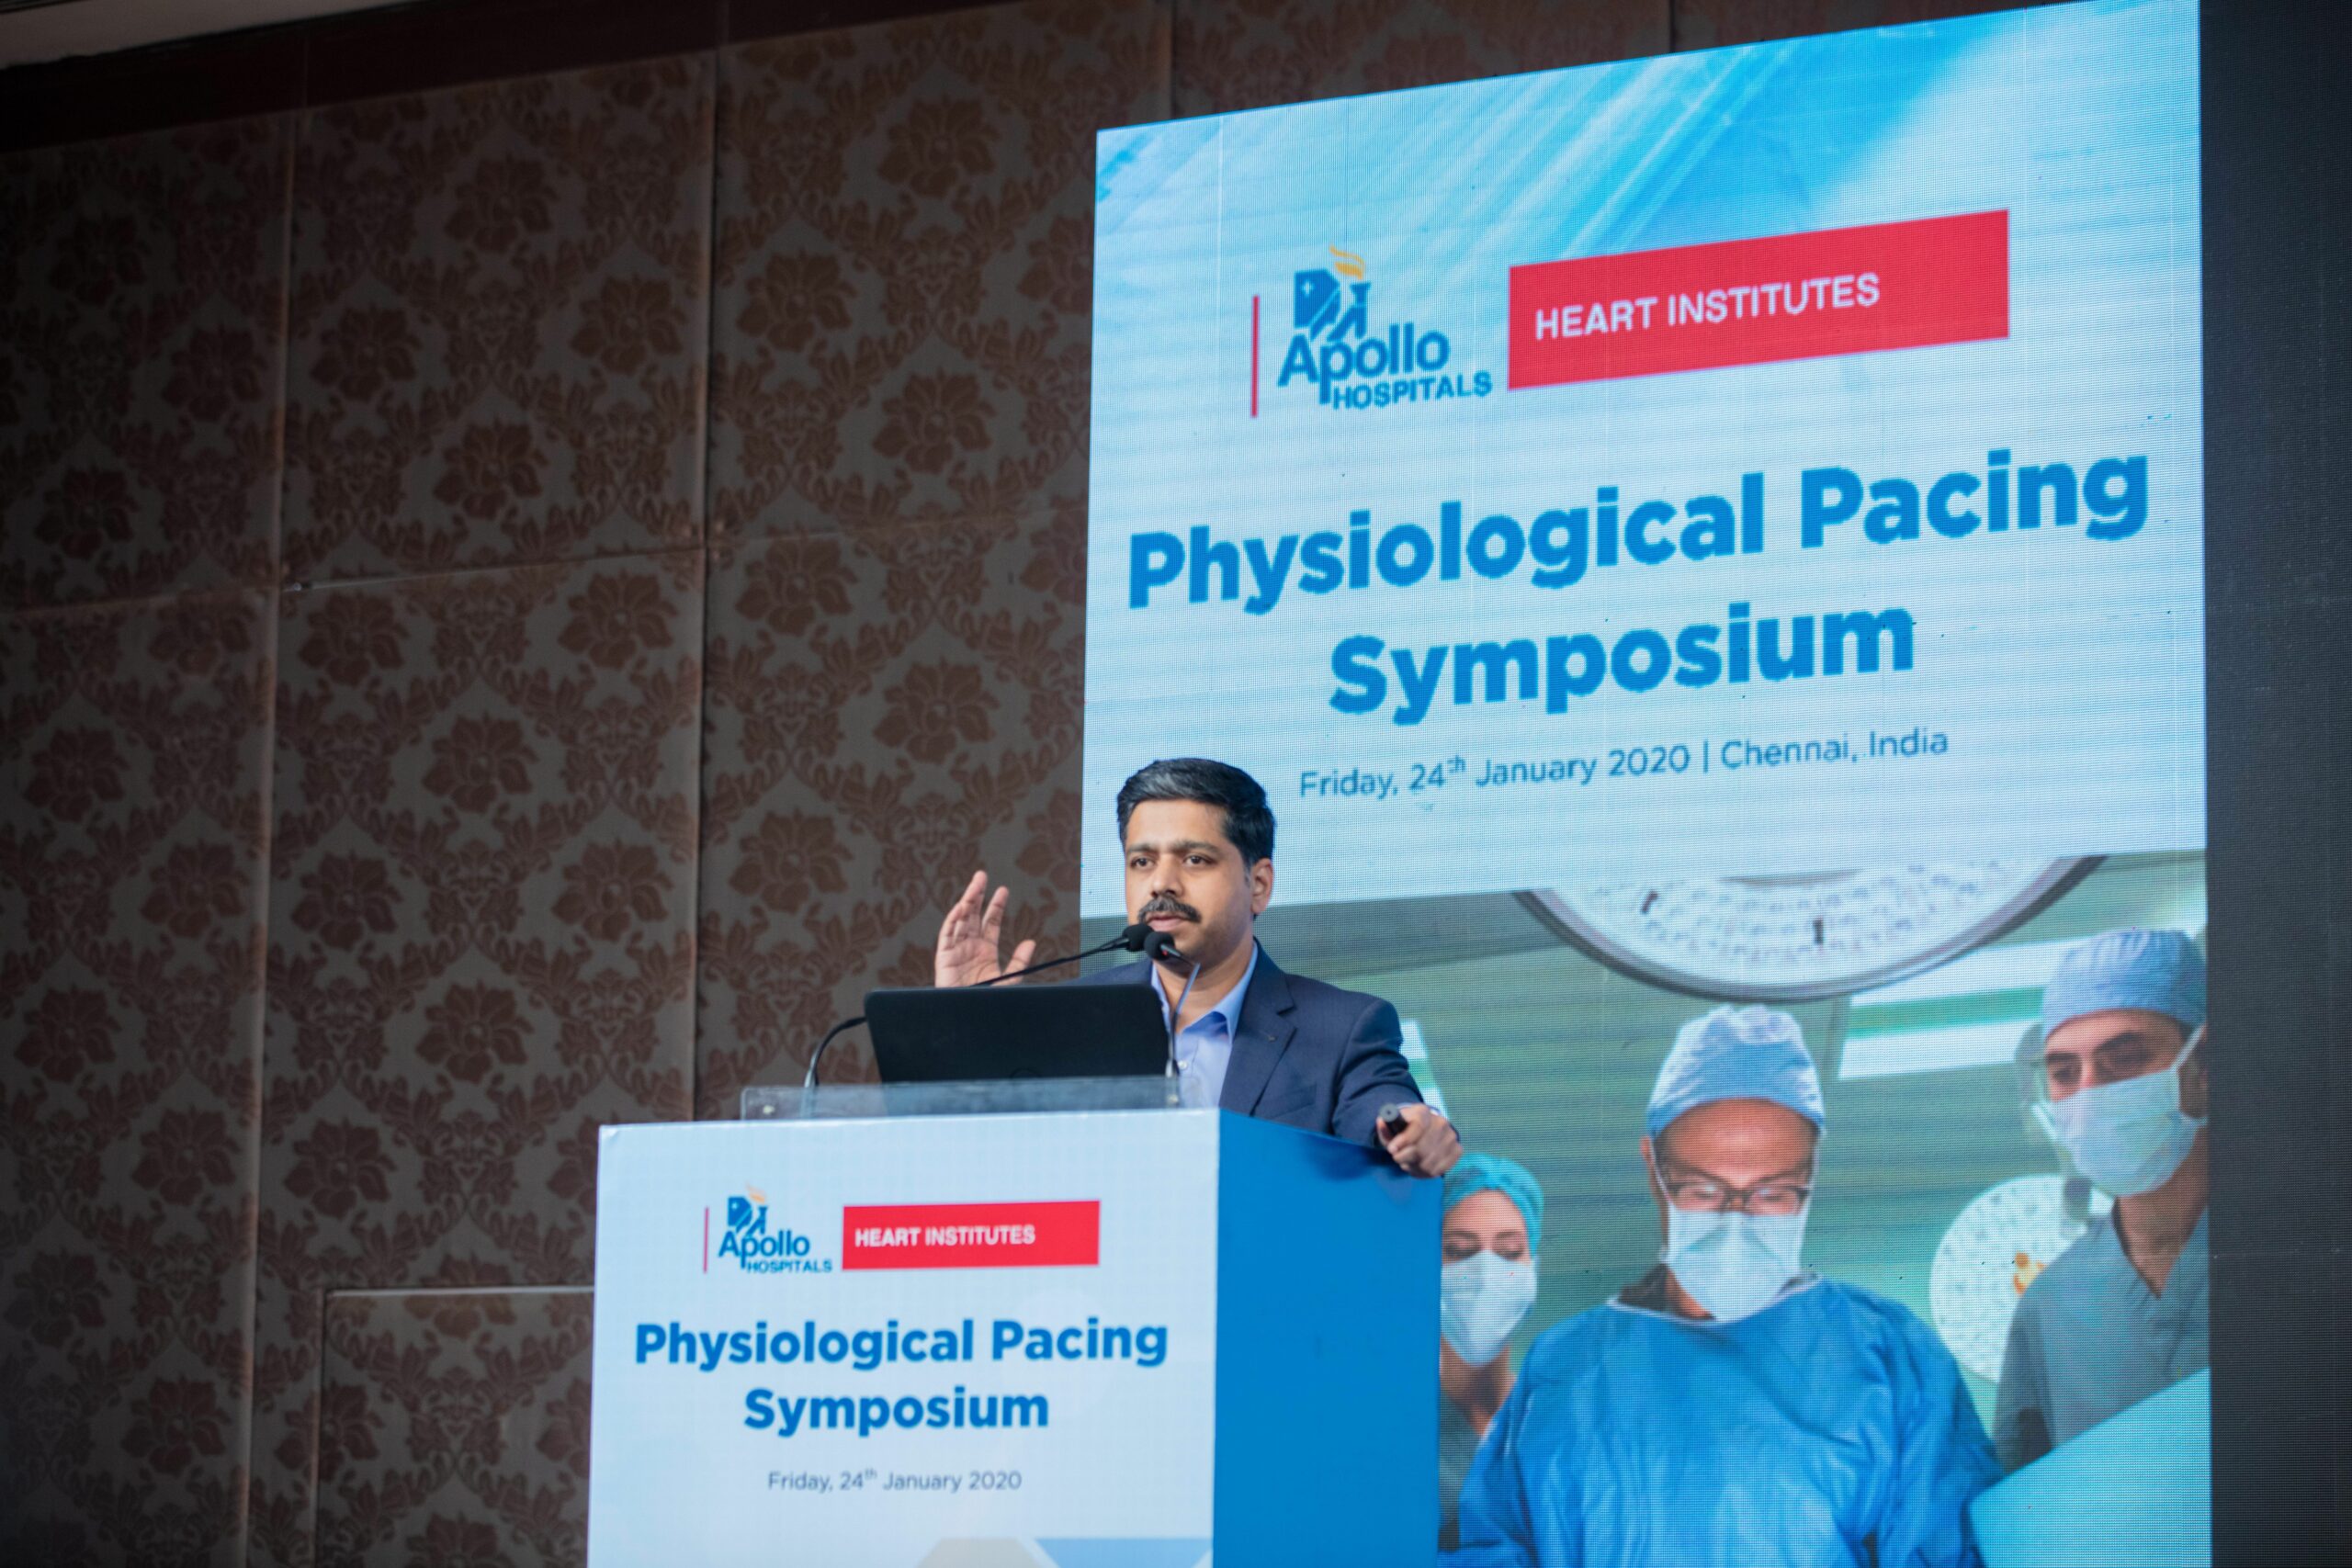 Photo of Dr. Karthigesan A.M. addressing a gathering at the Physiological Pacing Symposium.